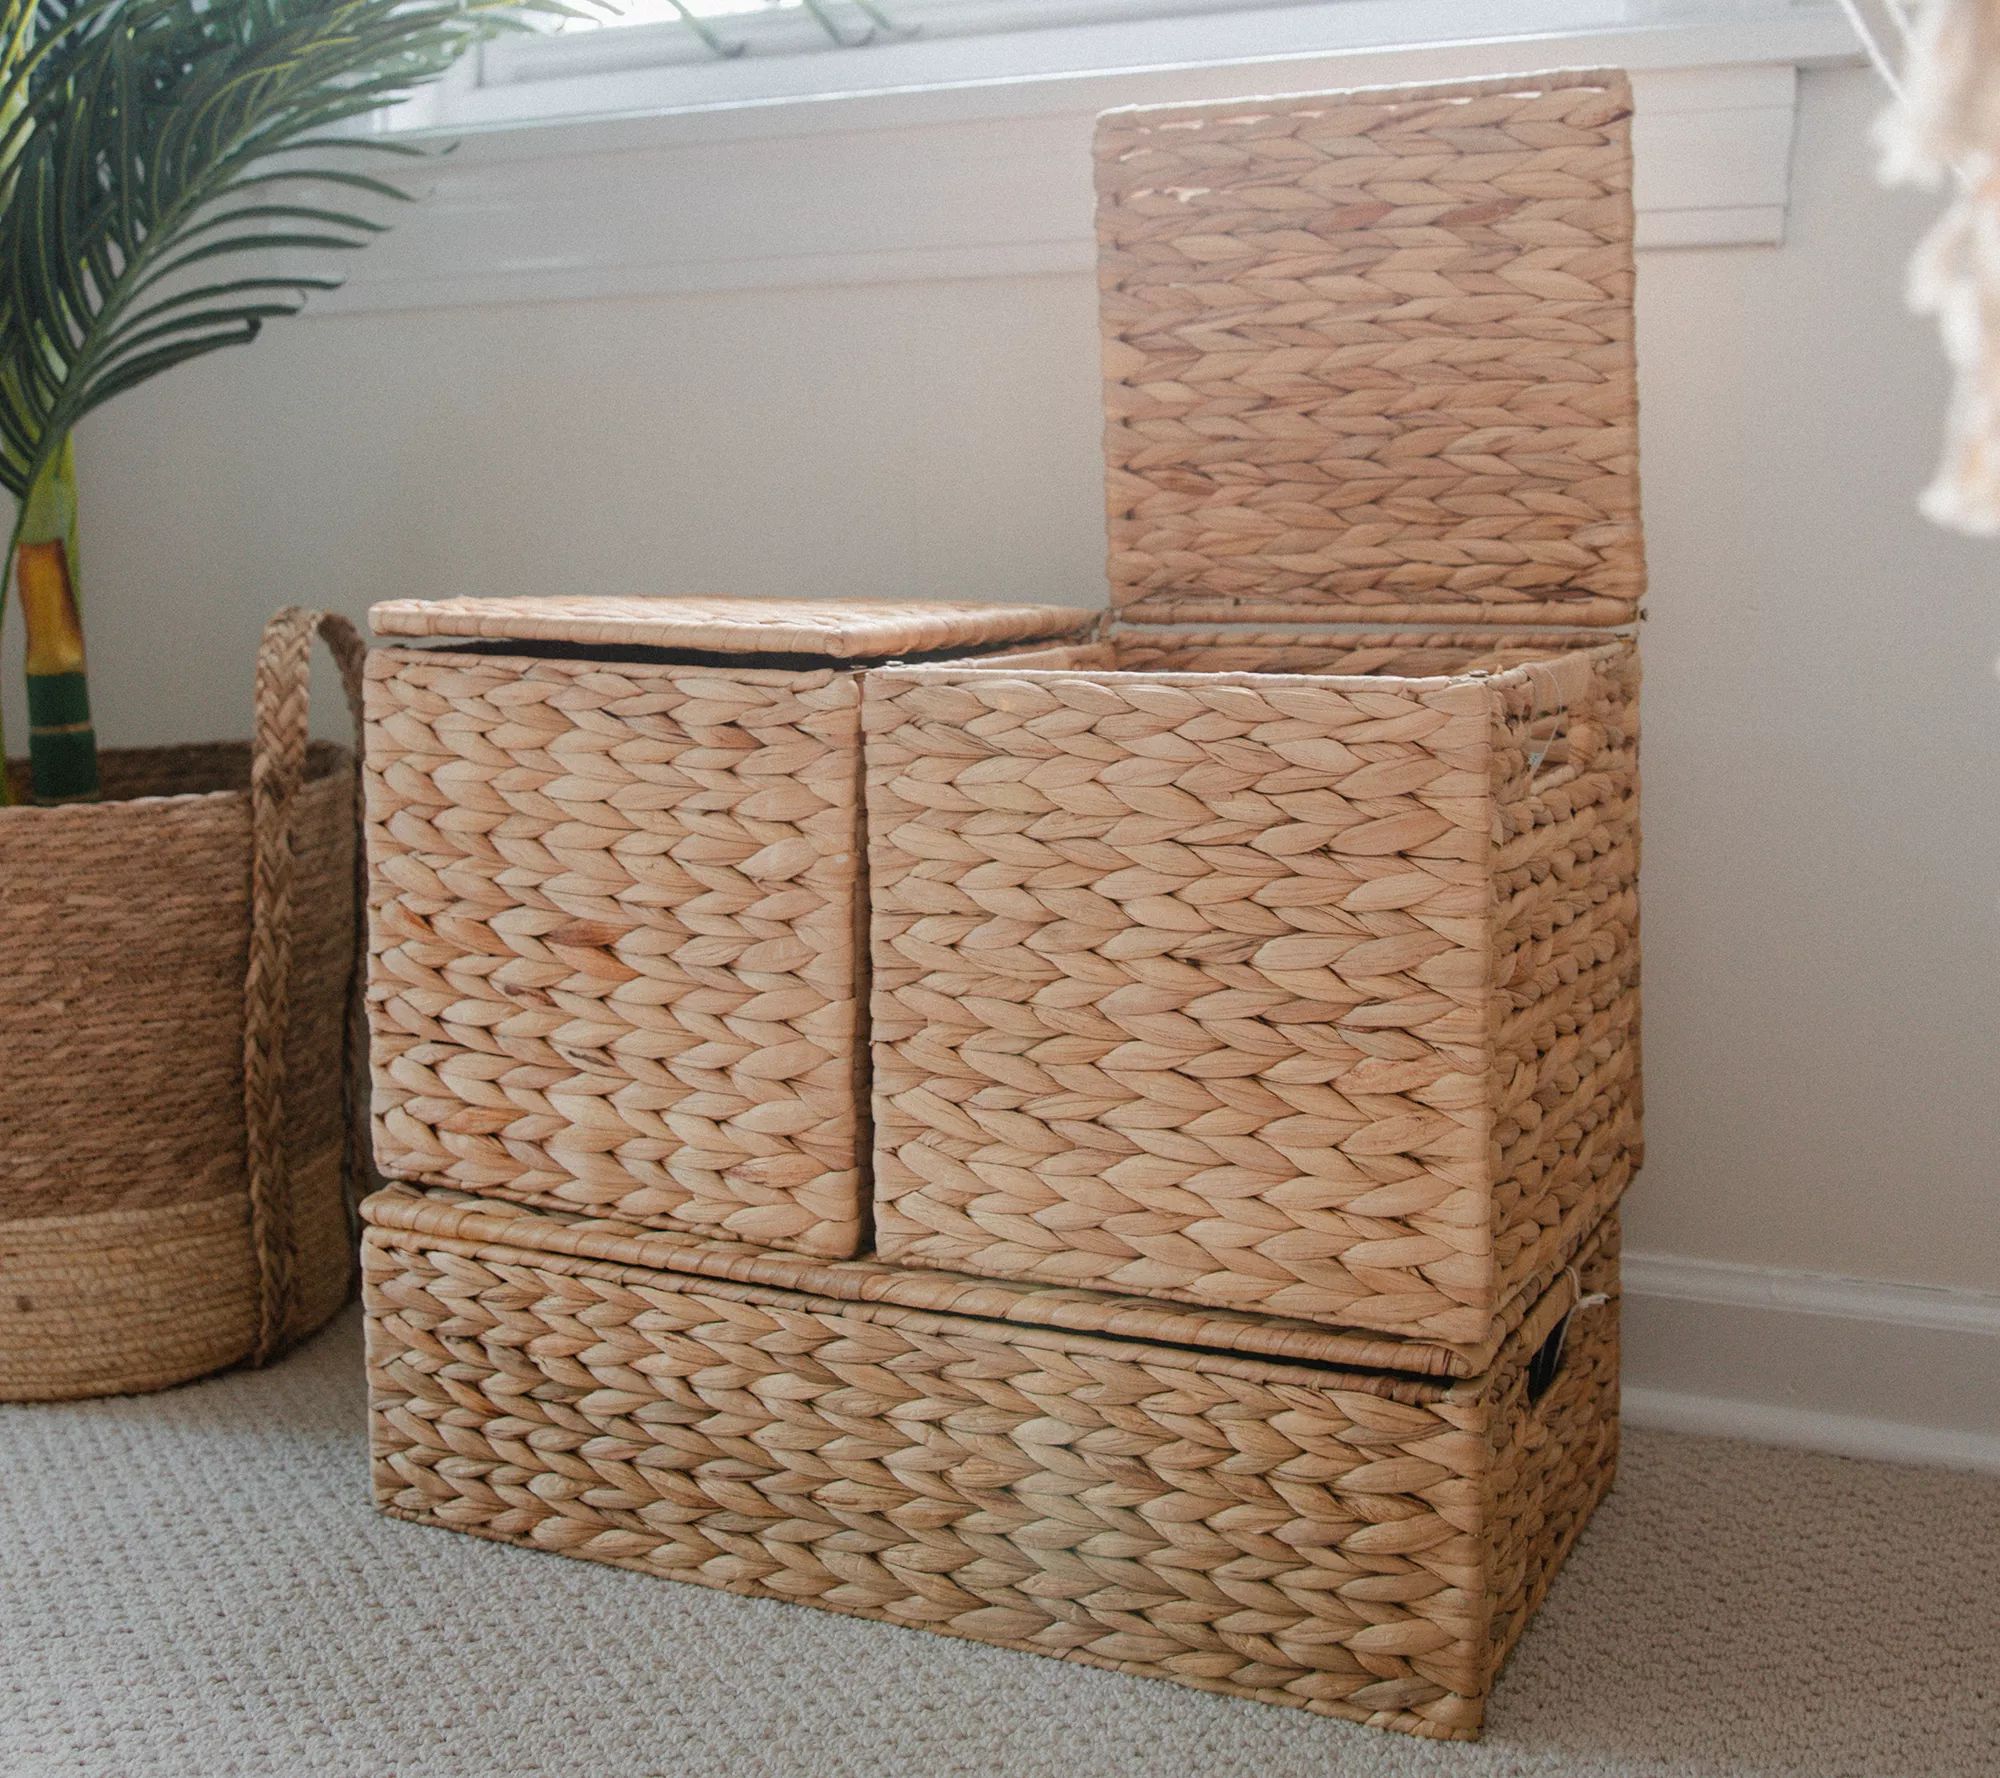 Set of 3 Collapsible Water Hyacinth Baskets by Lauren McBride - QVC.com | QVC